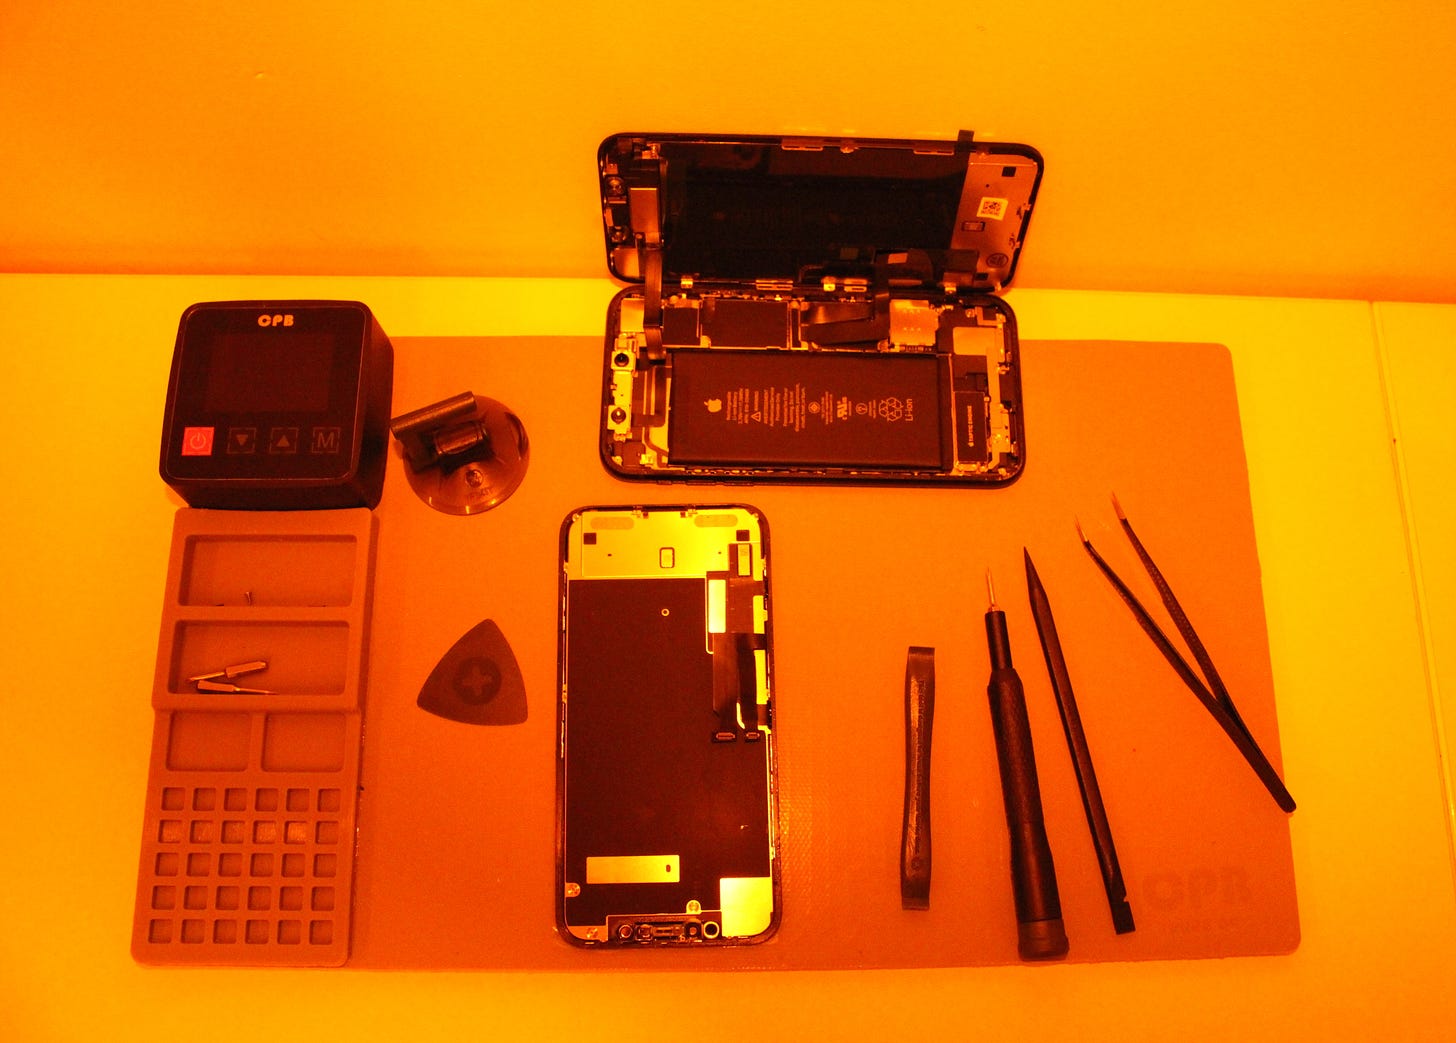 A photograph of a partially disassembled iPhone with repair tools.